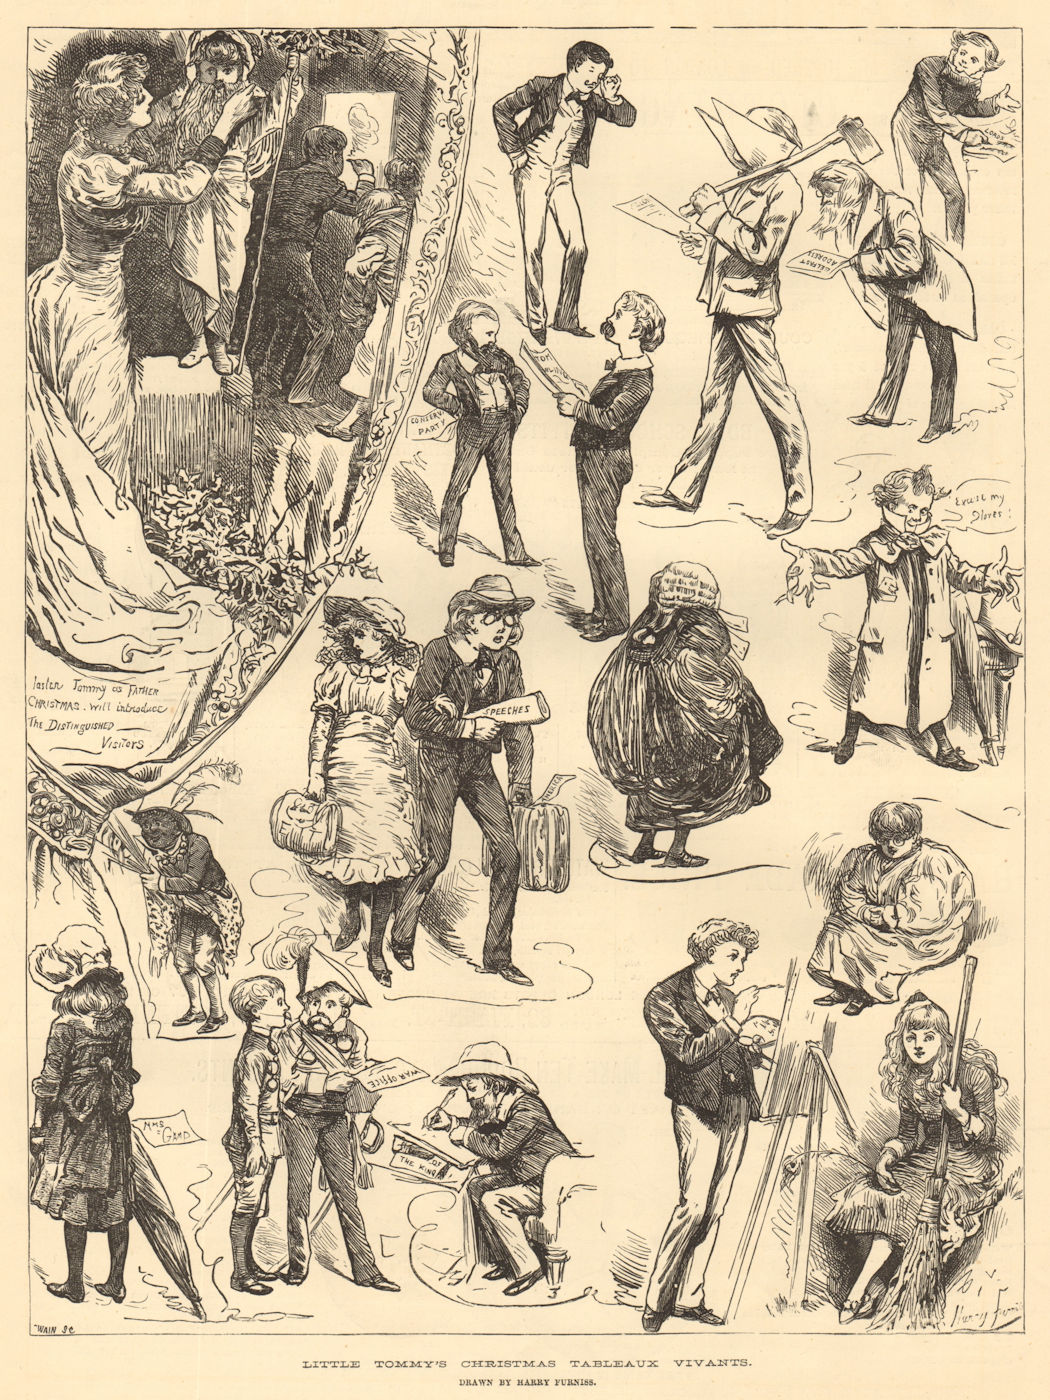 Little Tommy's Christmas tableaux vivants. Drawn by Harry Furniss. Society 1883